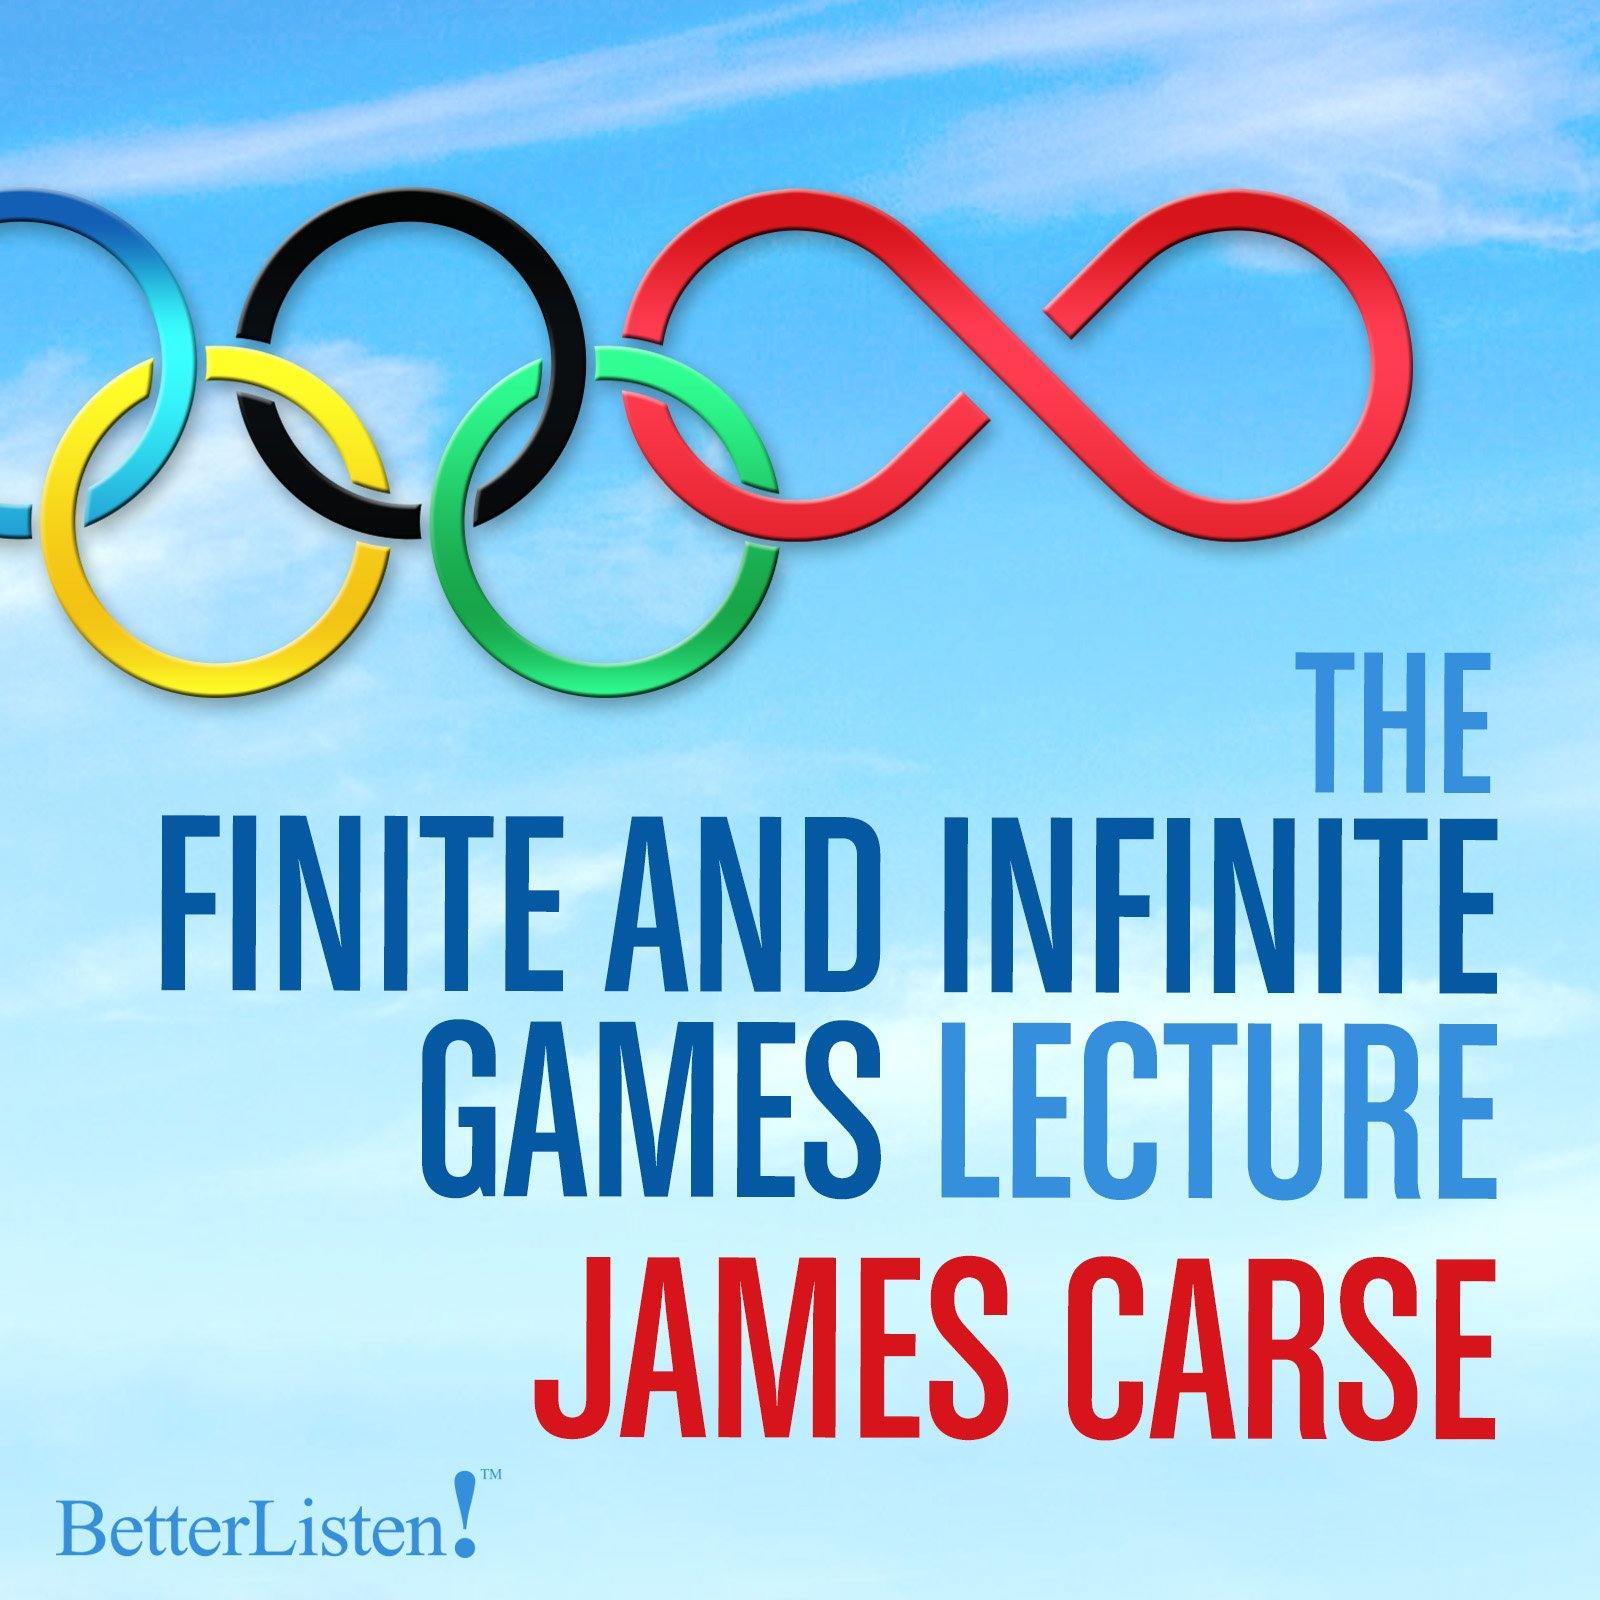 The Finite and Infinite Games lecture with James Carse - BetterListen!